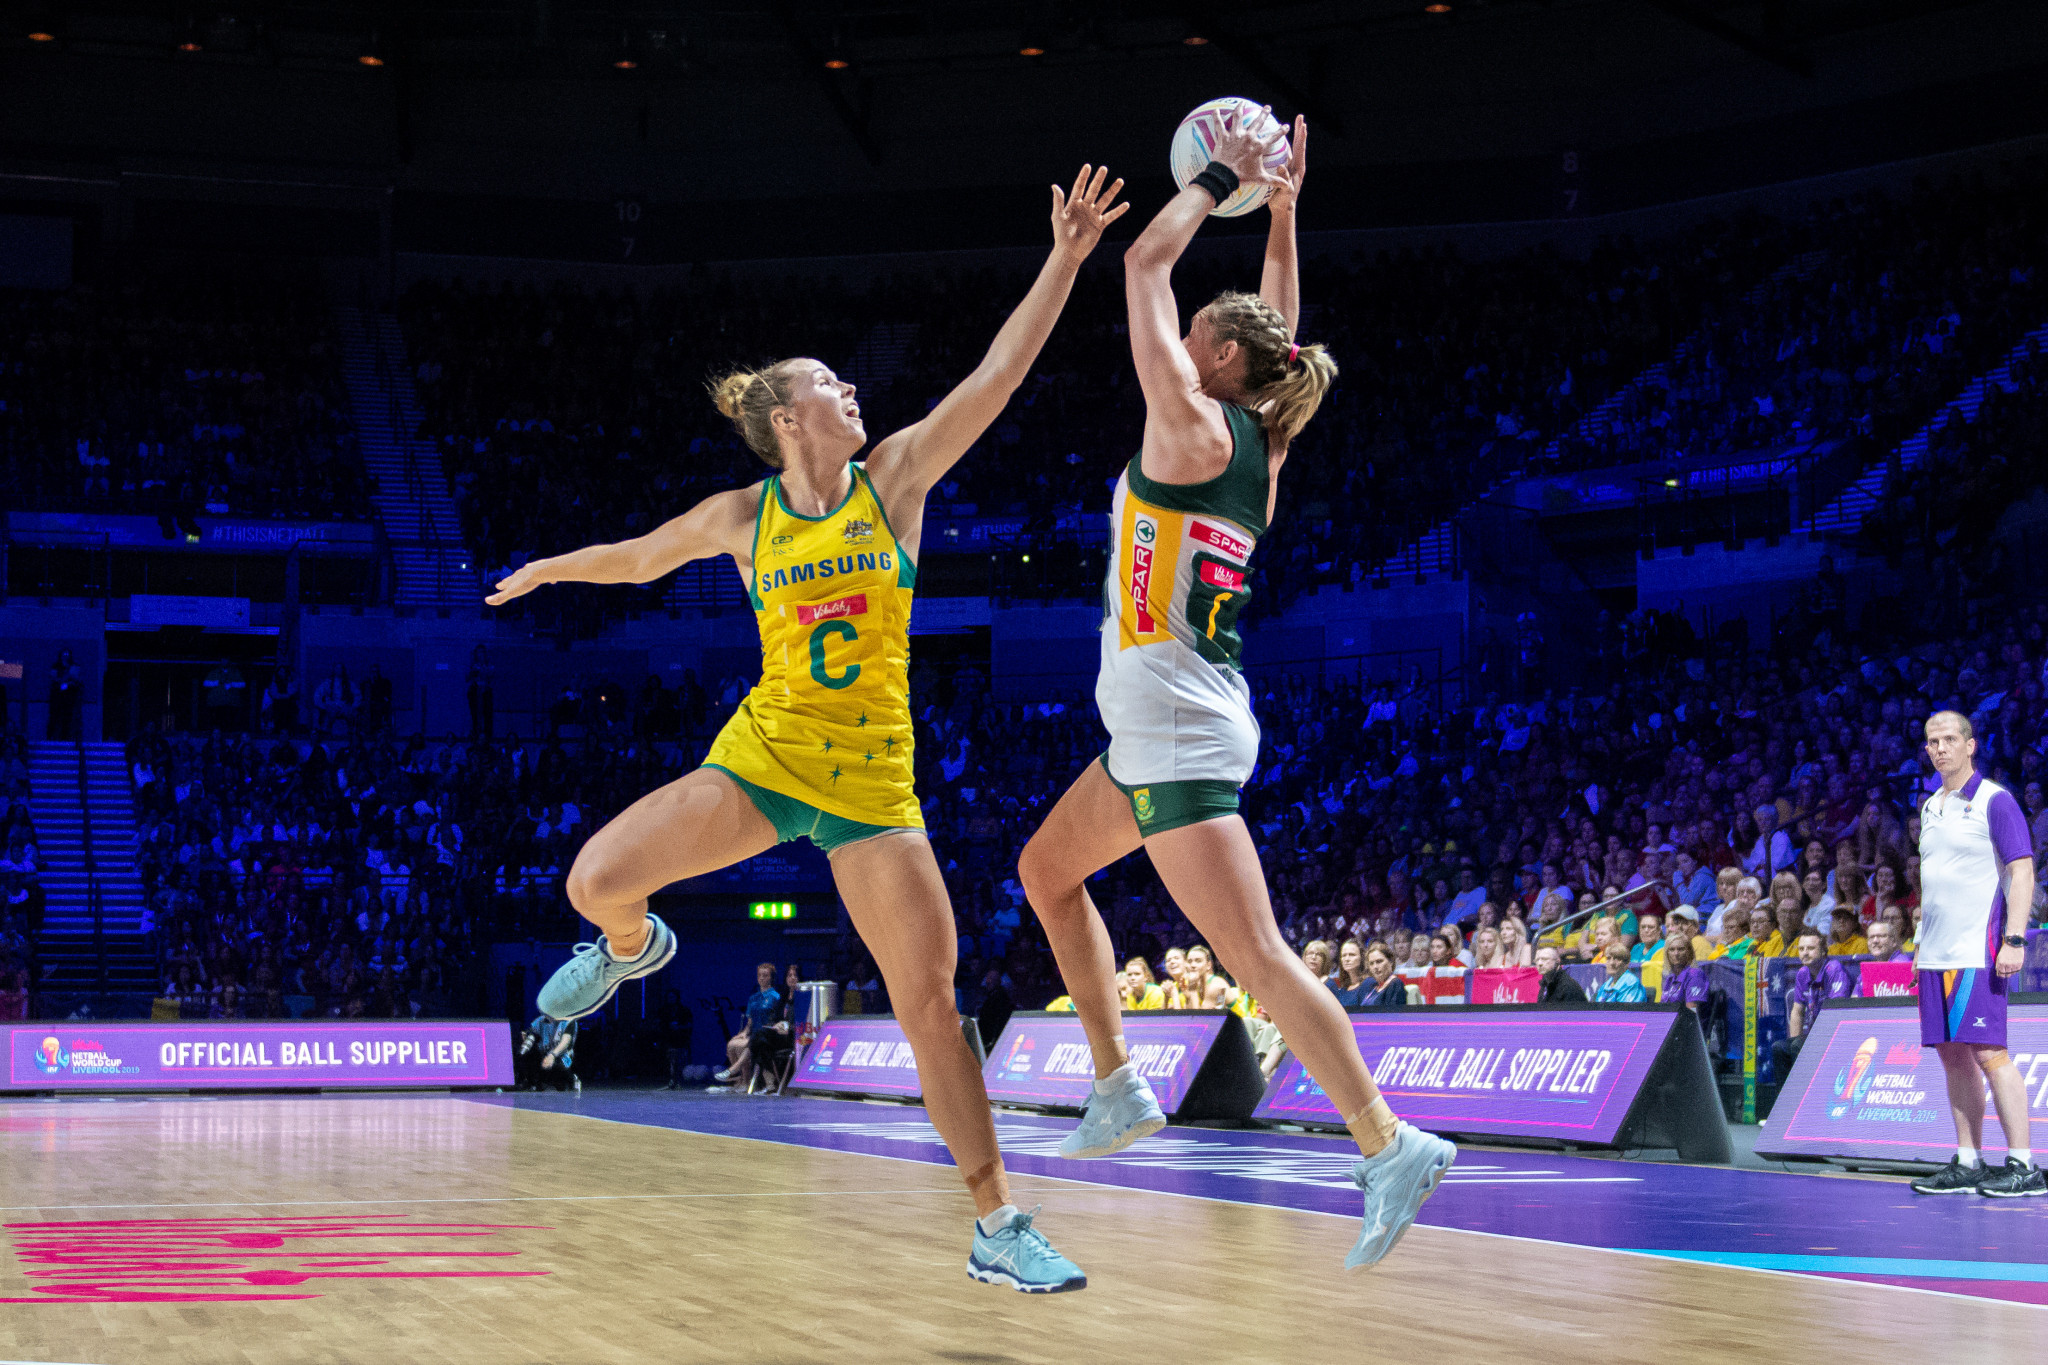 Netball Australia have partnered with Commonwealth Games Australia to develop netball talent ©Getty Images